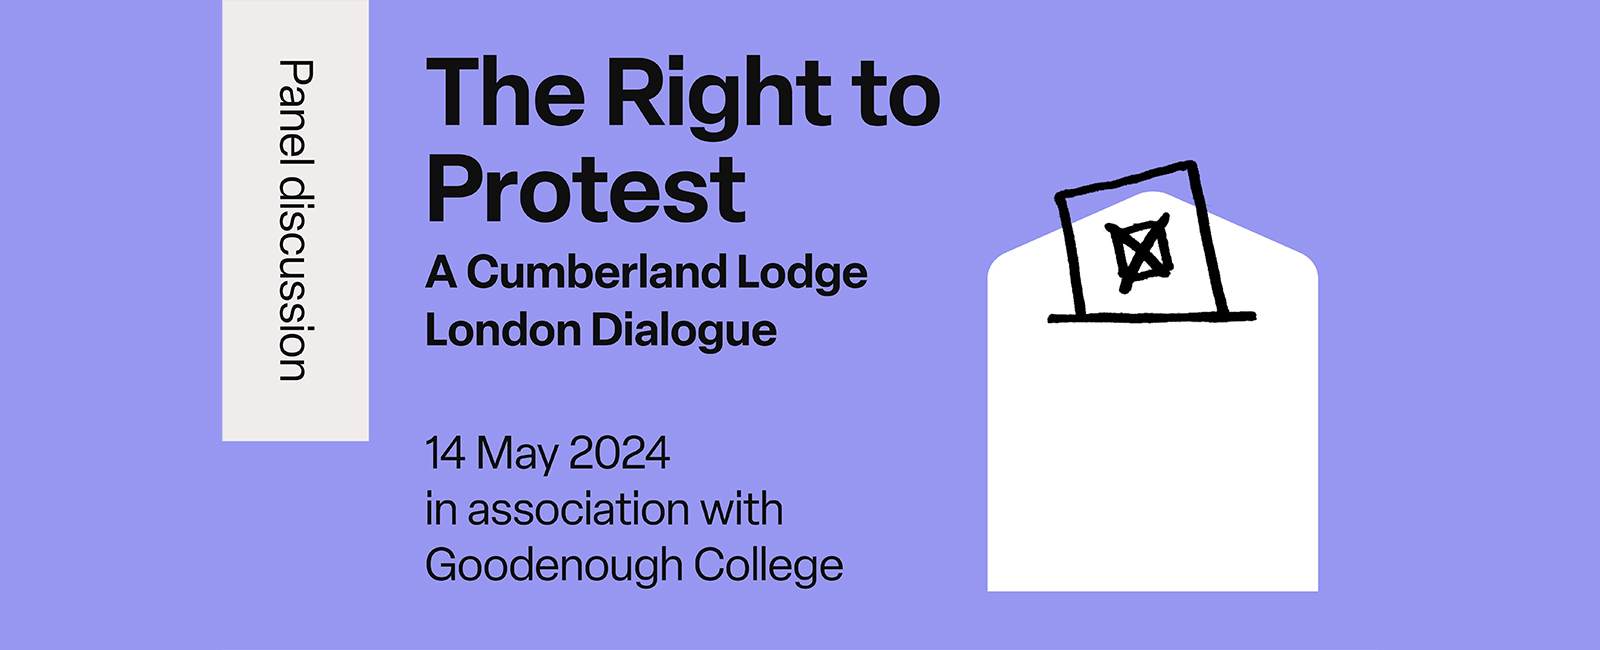 TEXT: Panel discussion, The Right to Protest, A Cumberland Lodge London Dialogue, 14 May 2024 in association with Goodenough College